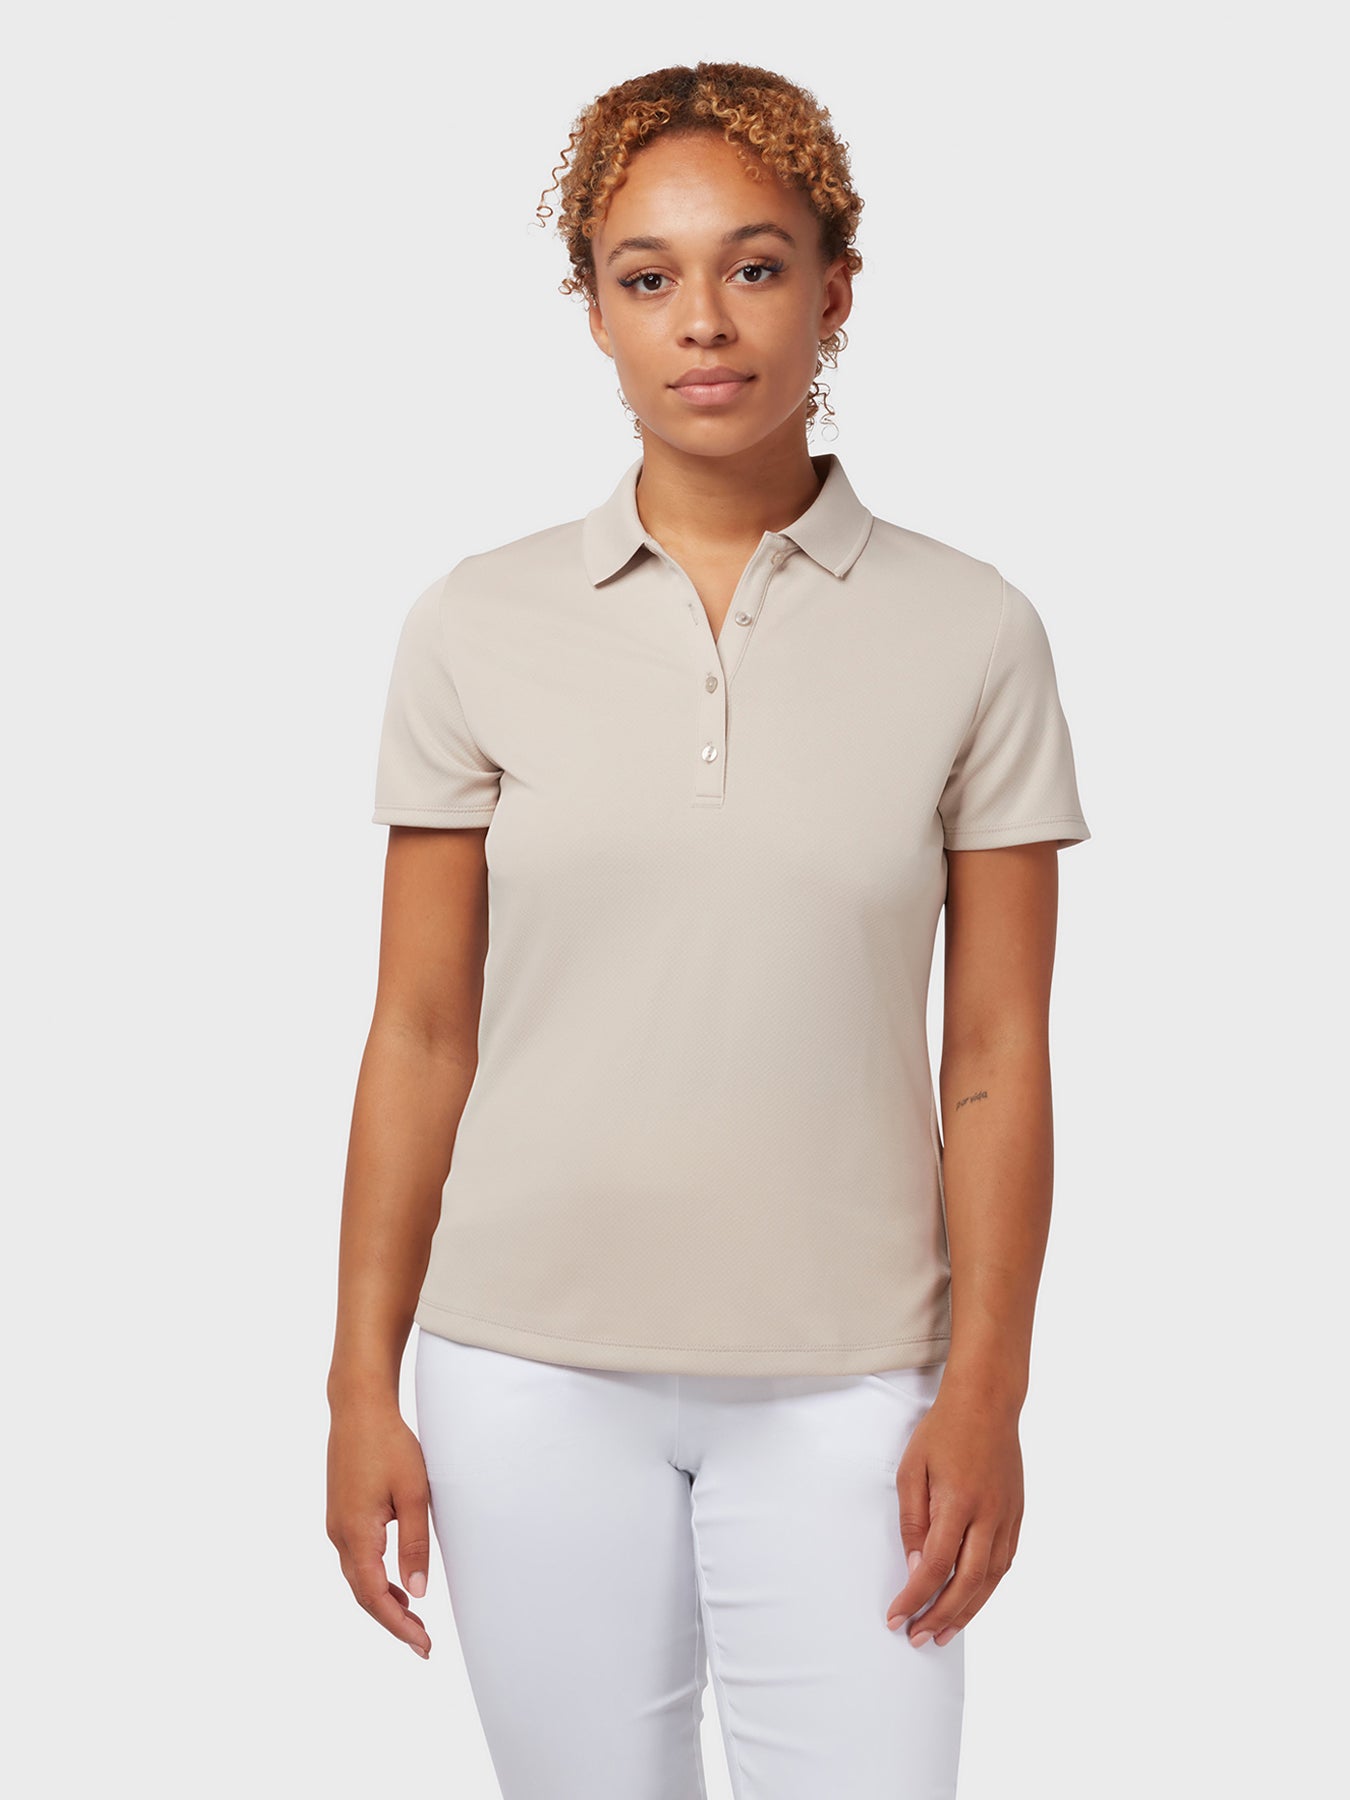 View Swing Tech Womens Polo In Chateau Grey Chateau Grey L information